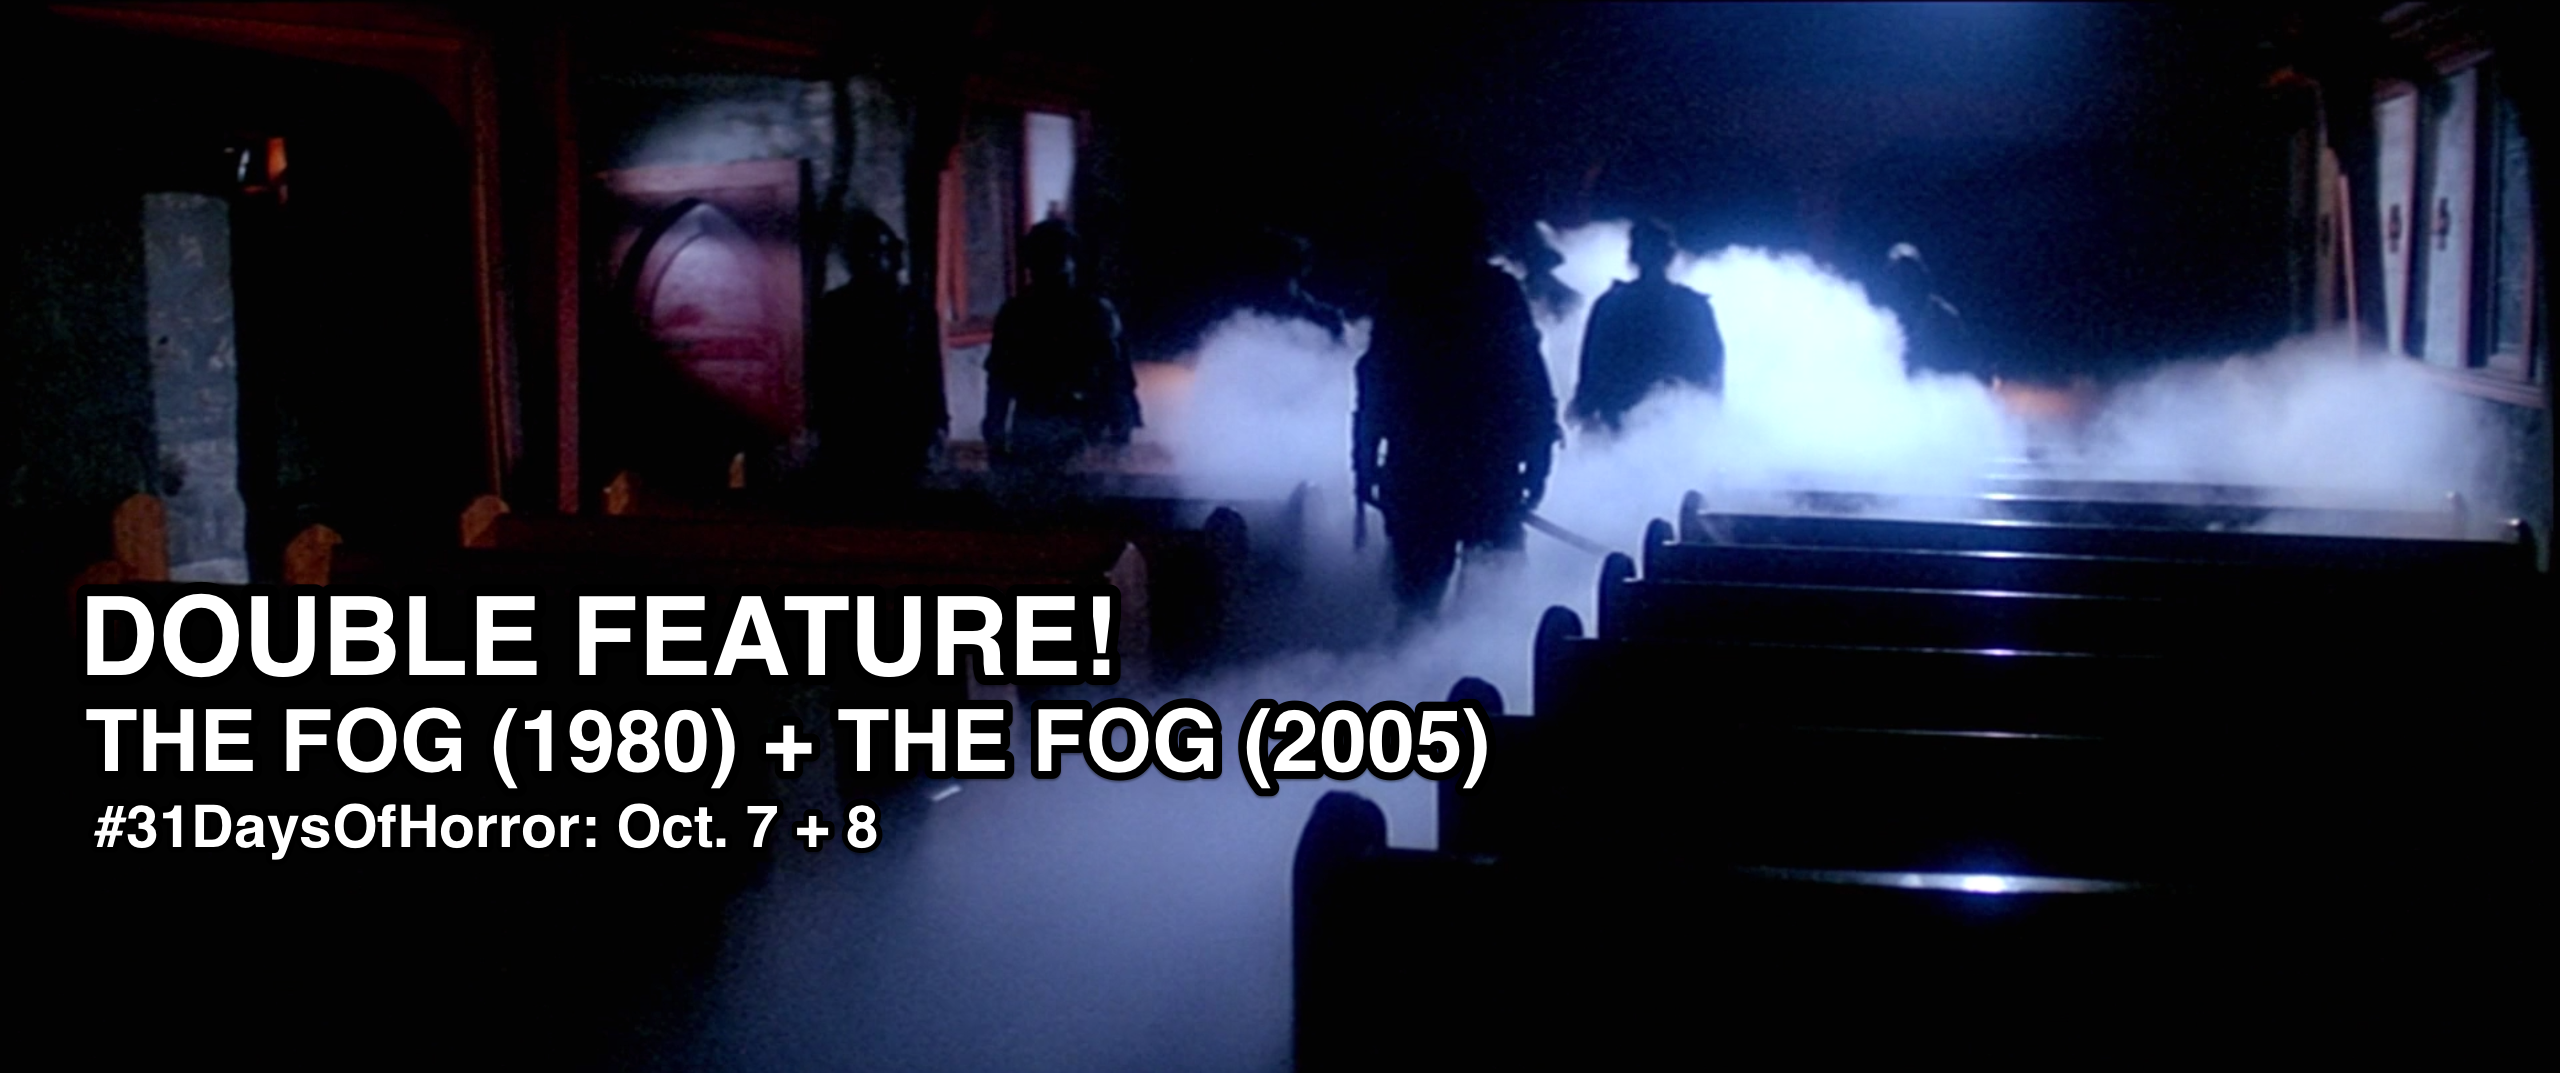 Beautiful Creatures: John Carpenter's The Thing - Psycho Drive-In